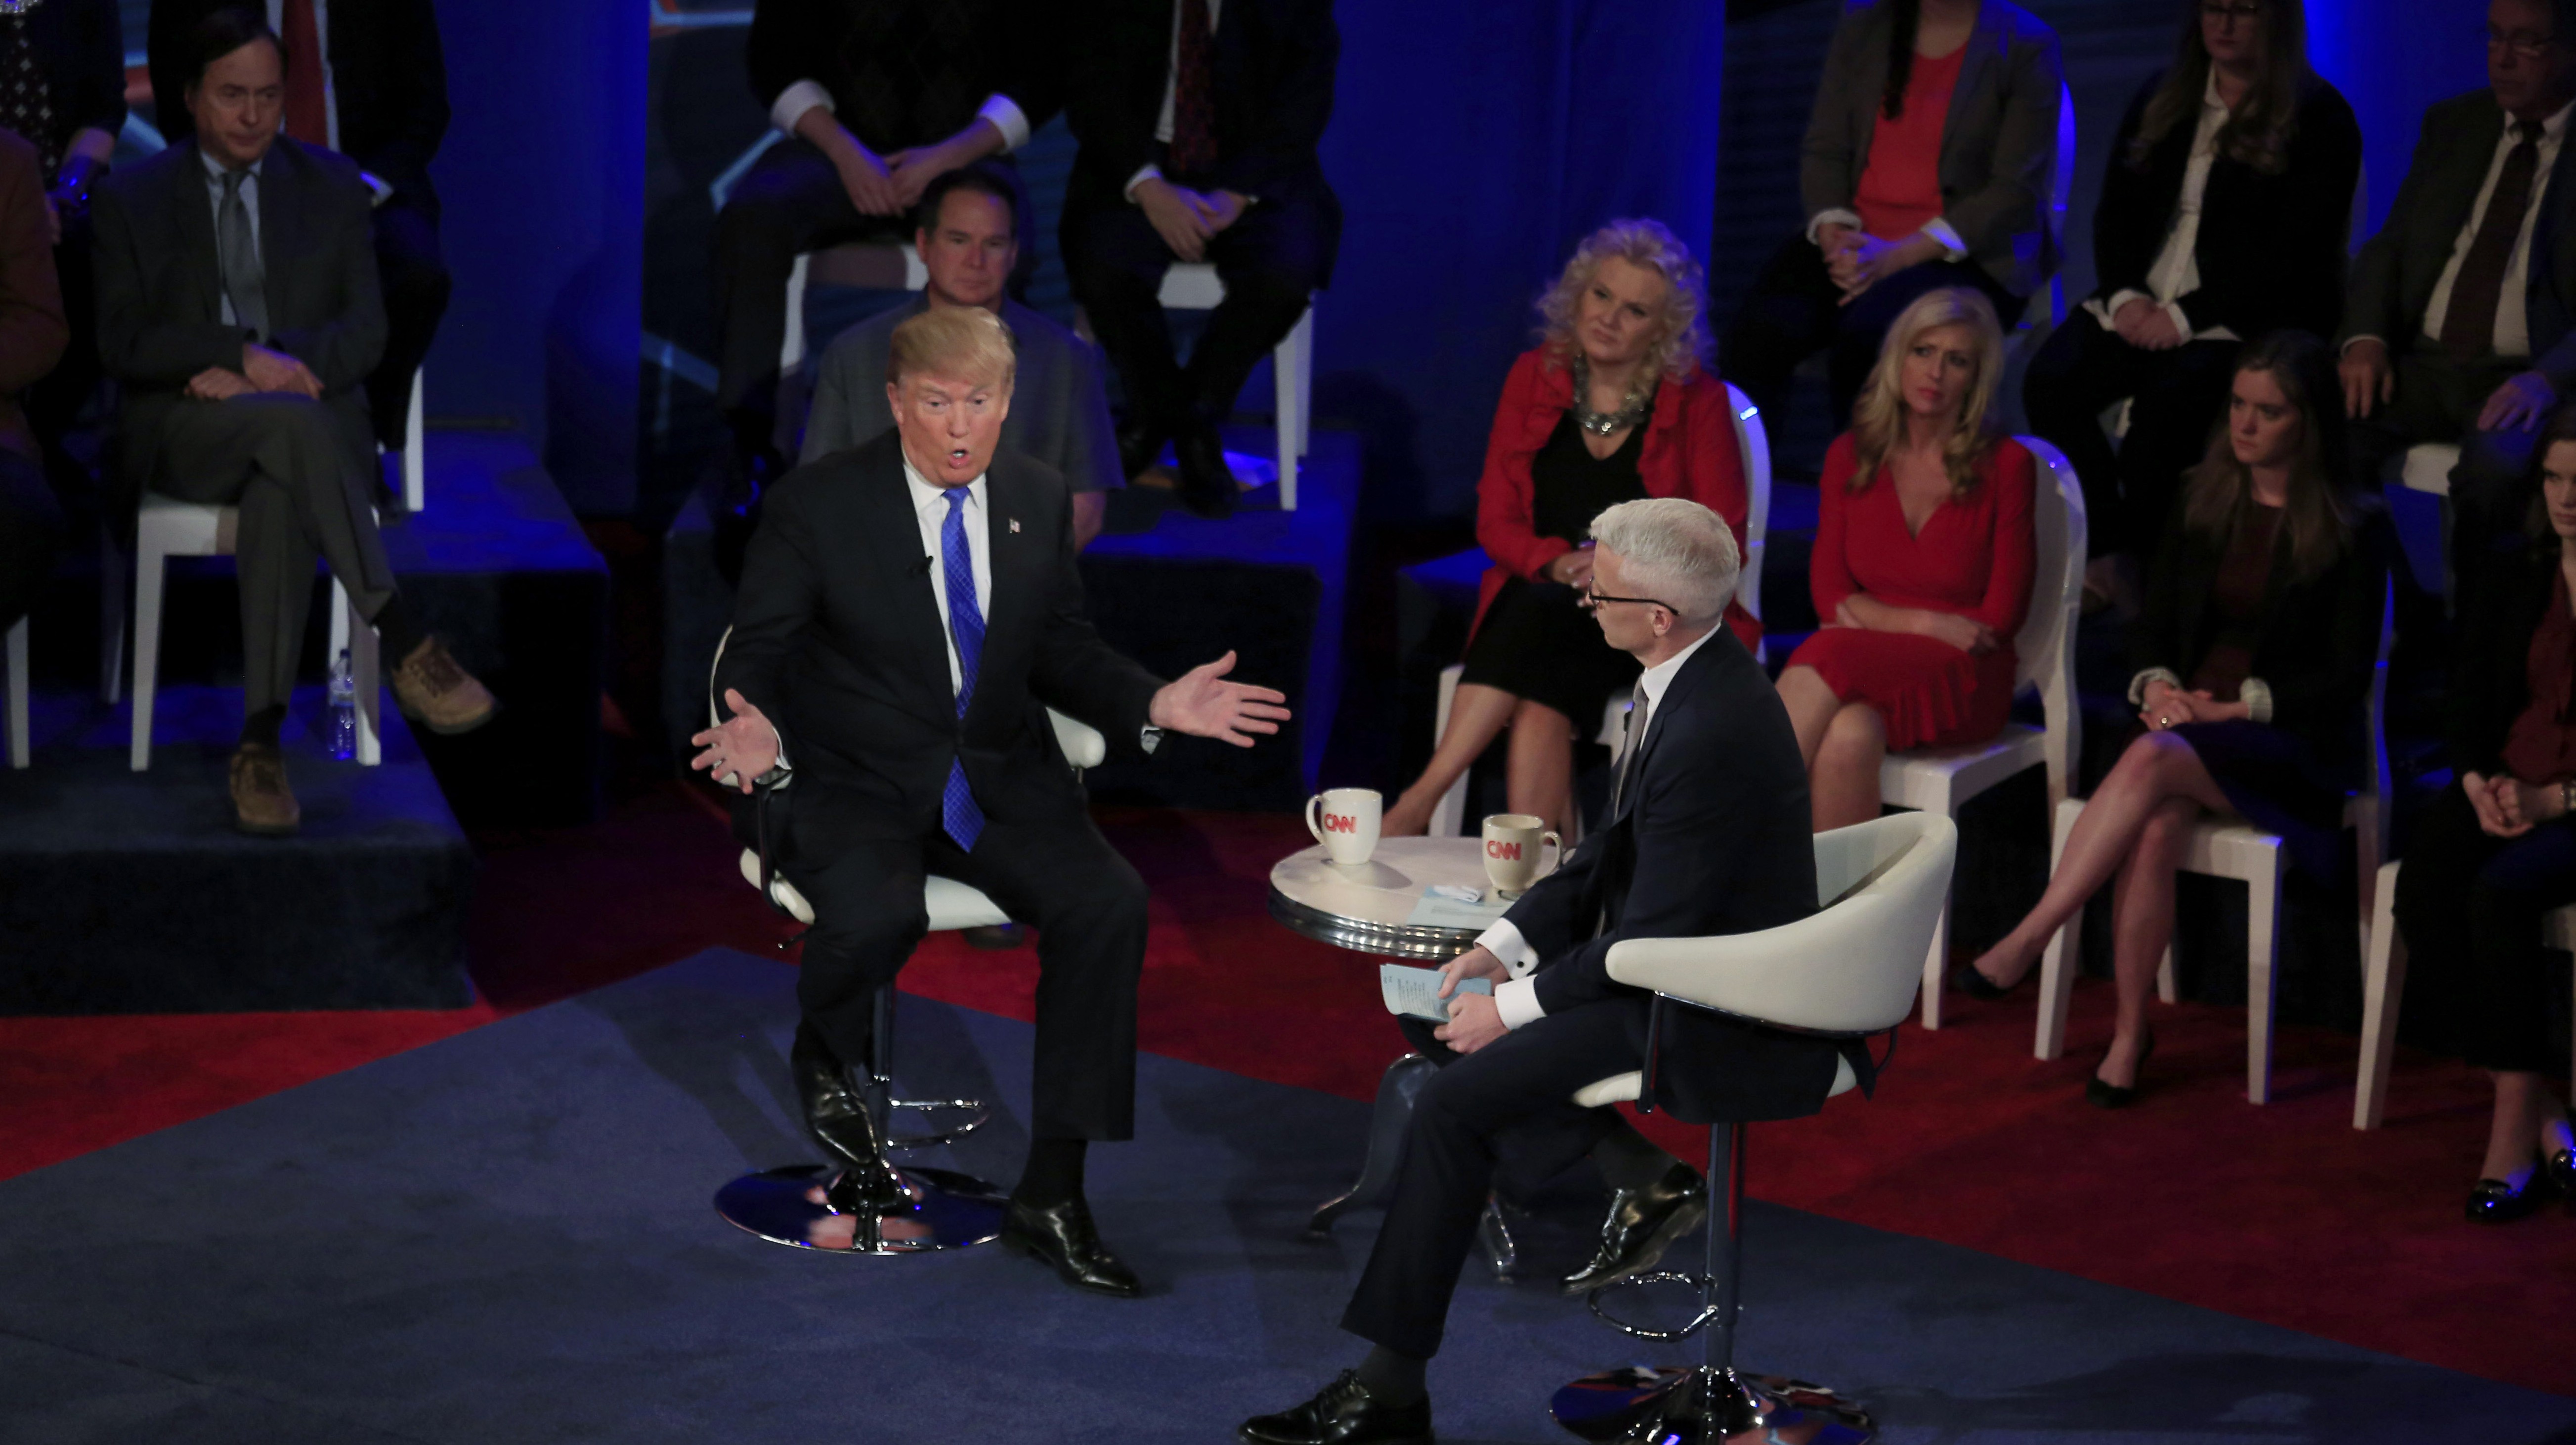 Republican Presidential candidate Donald Trump takes part in a town hall event moderated by Anderson Cooper March 29, 2016 in Milwaukee, Wisconsin. (Getty)